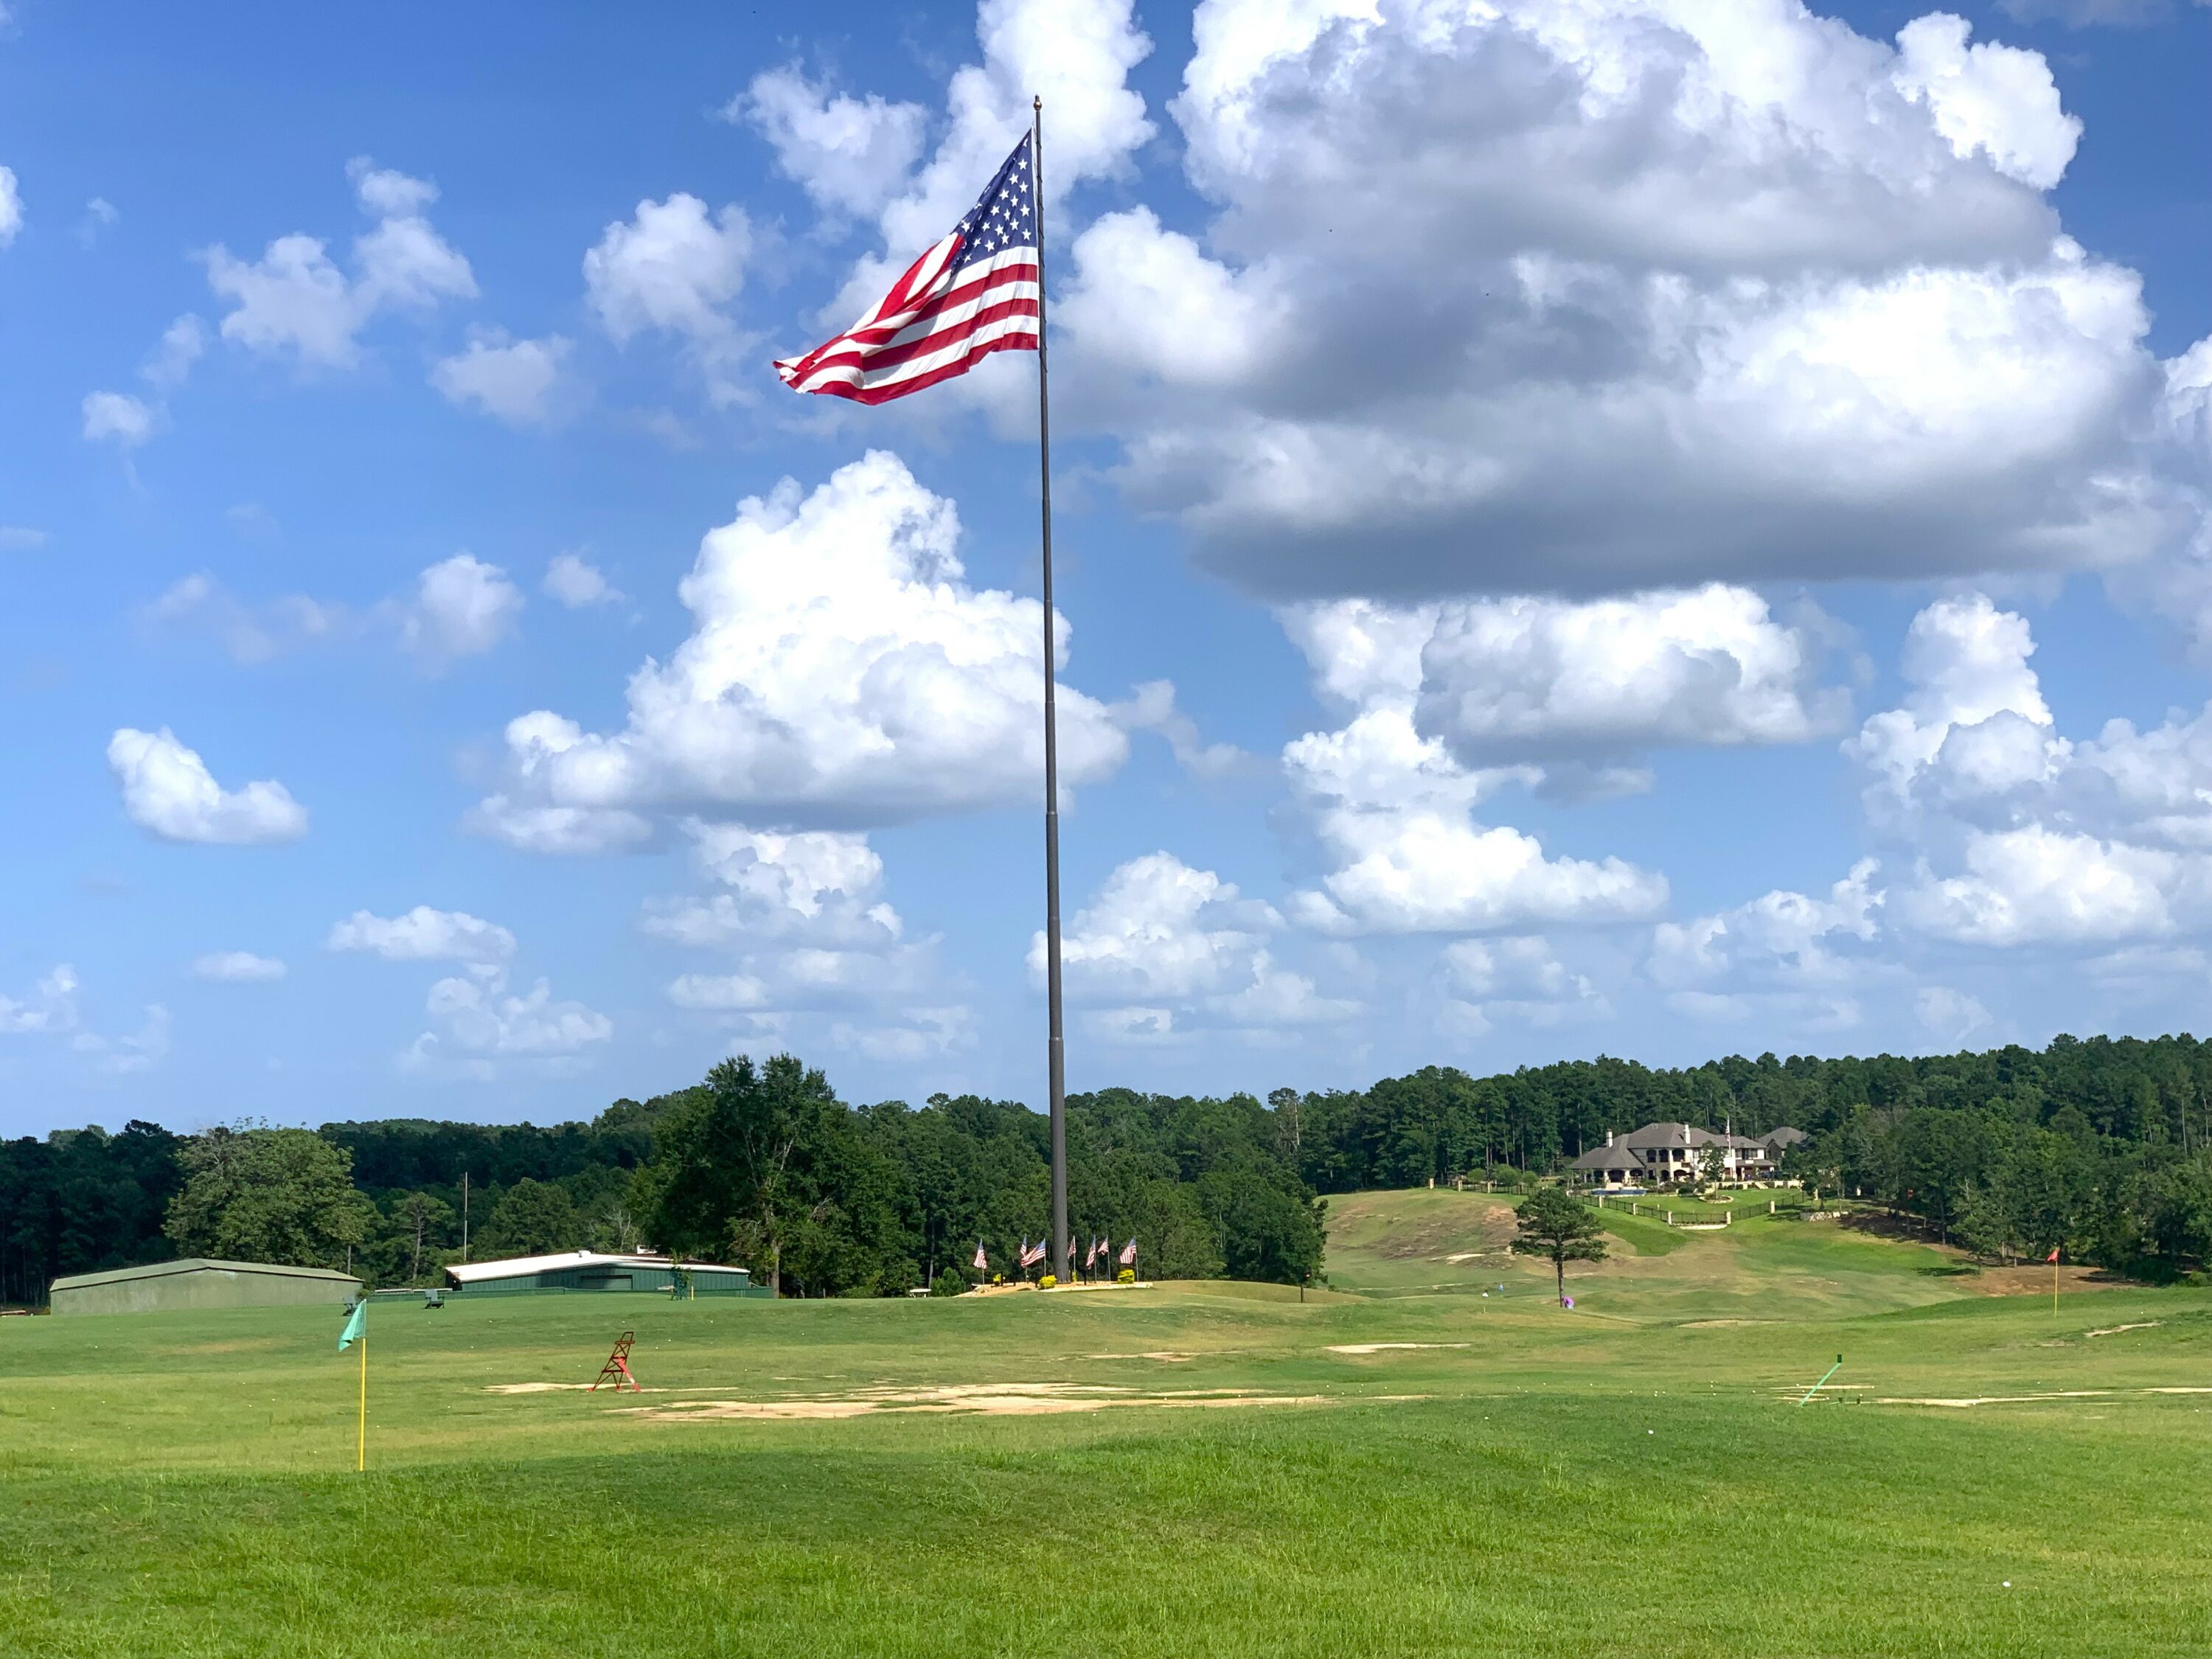 The 180-foot-long American flag that resides just off the ninth green at Tempest Golf Club always gets a lot of attention, and rightfully so. A benefit tournament to help raise money for the upkeep of the flag is set for this coming Friday at the course. (Photo by MITCH LUCAS - ETBLITZ.COM)